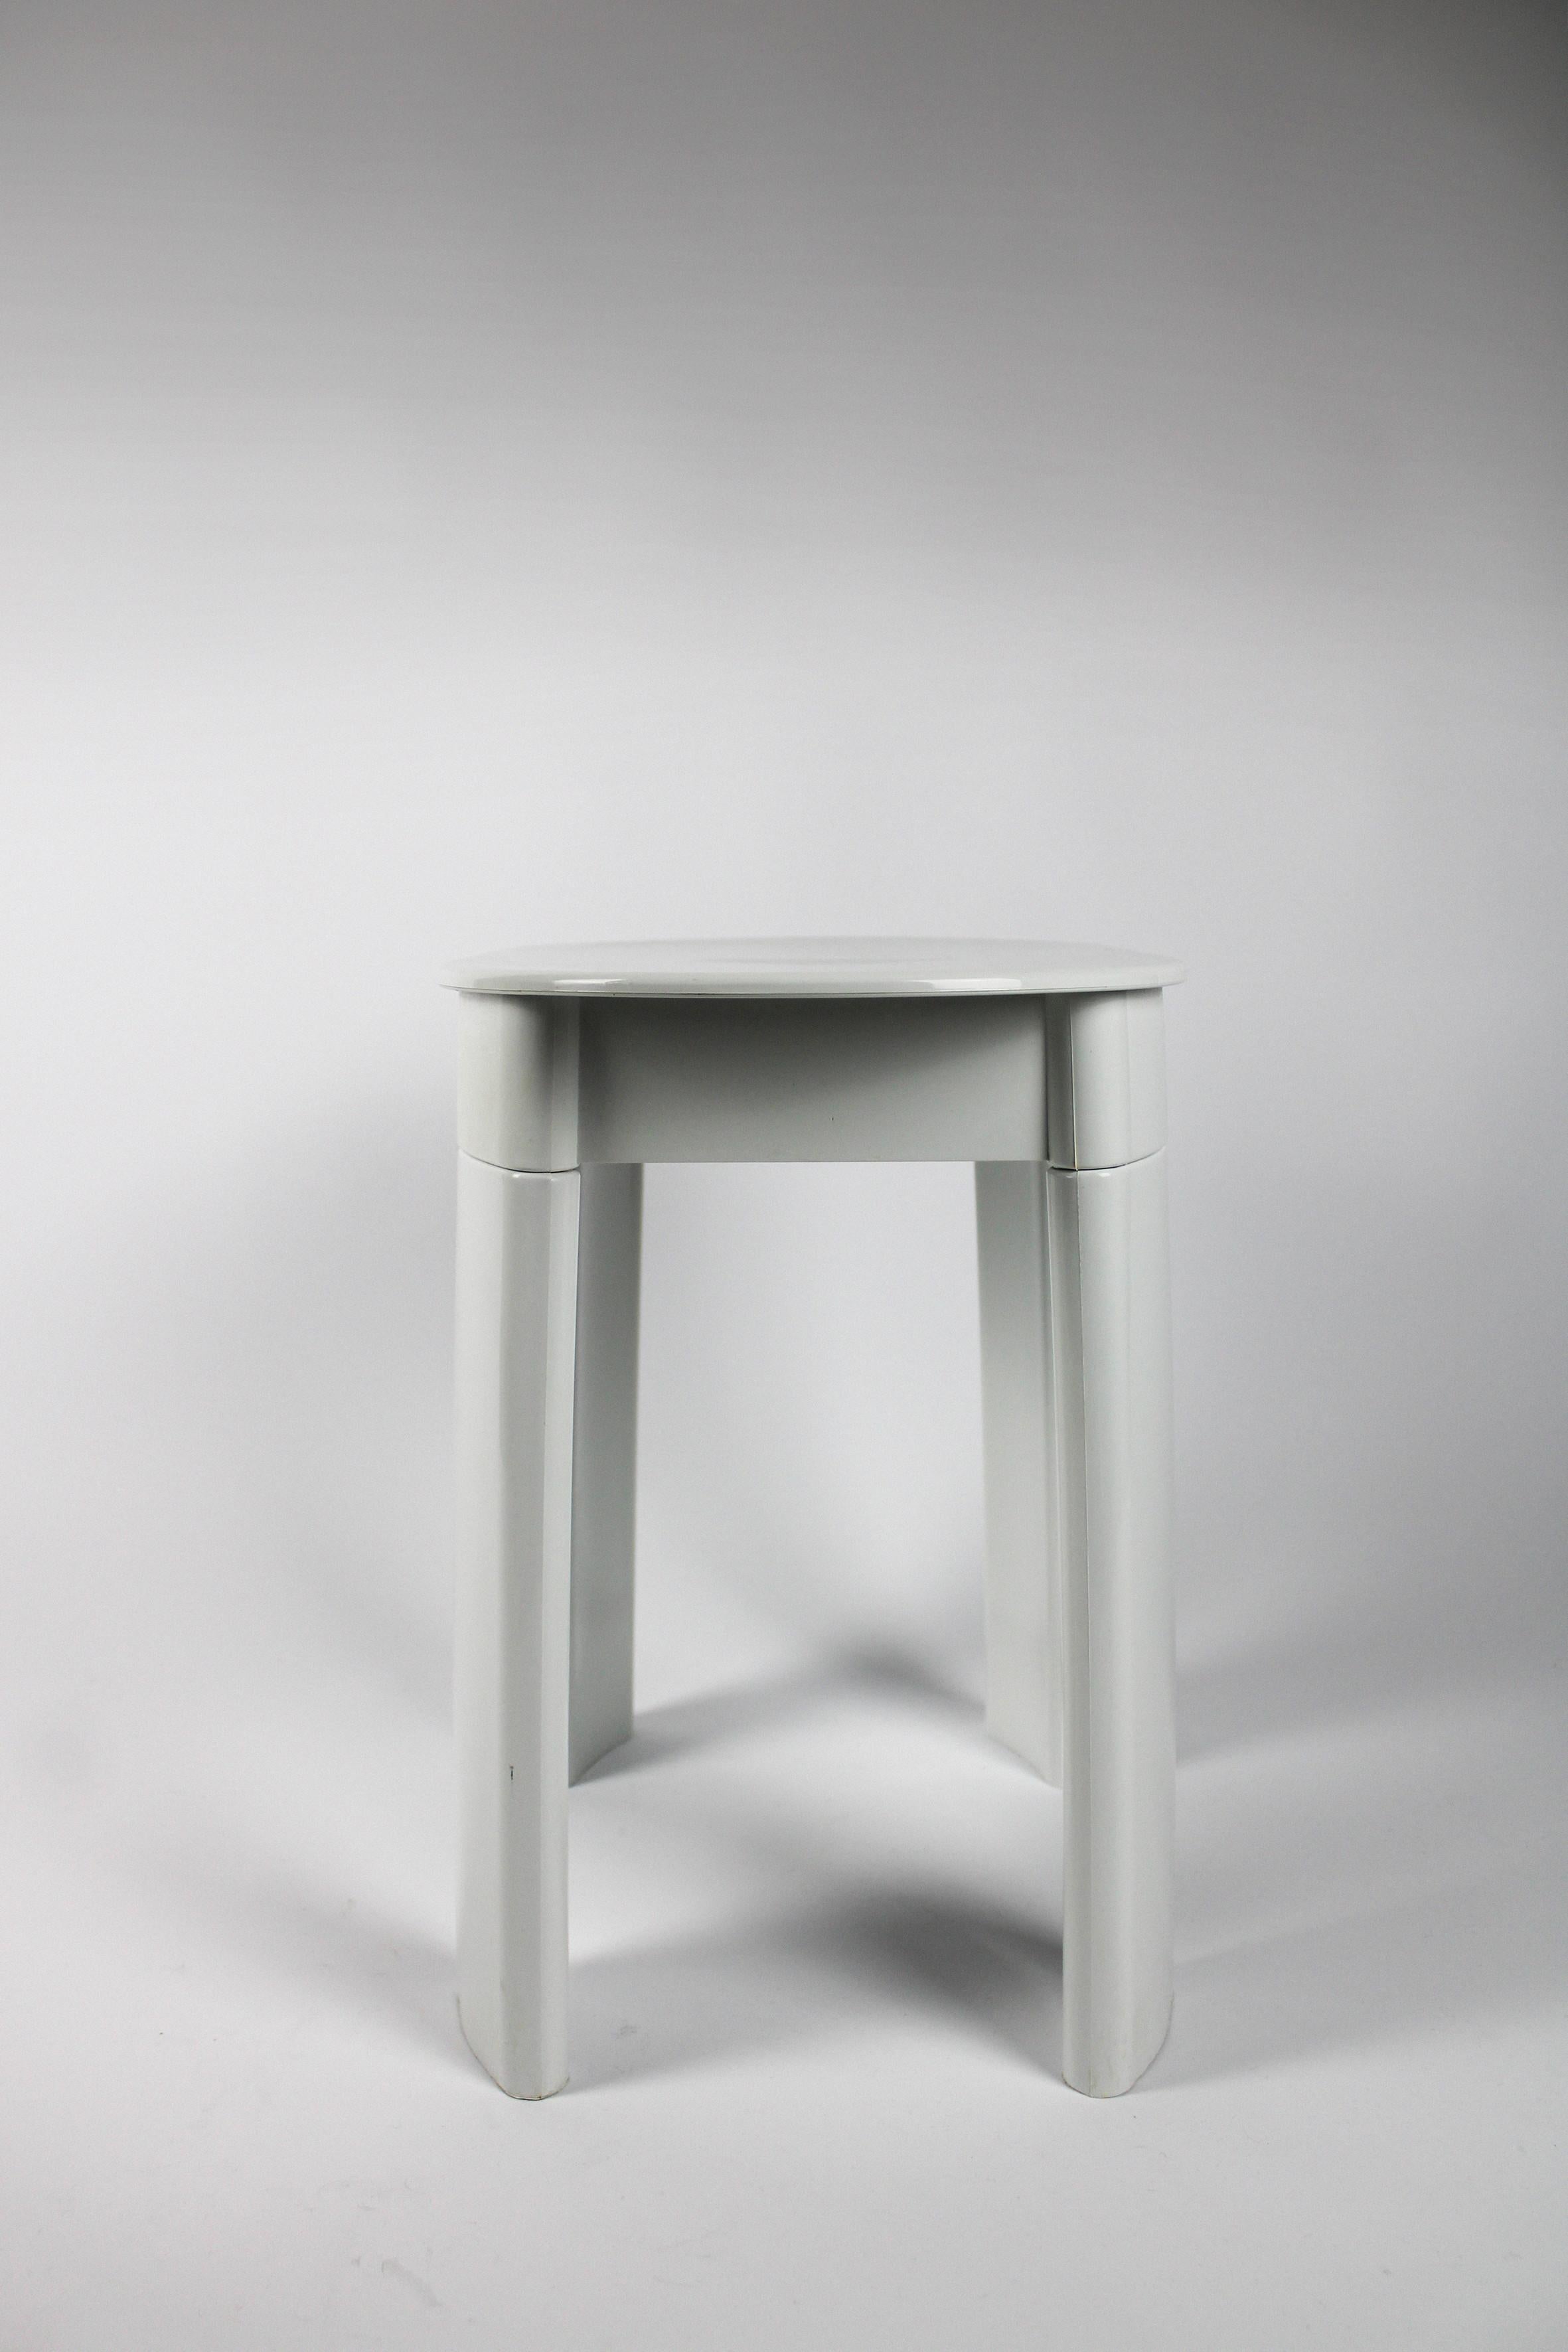 Olaf Von Bohr Side Table Space Age Stool Gedy Plastic Italy 1970's In Good Condition For Sale In Antwerpen, BE